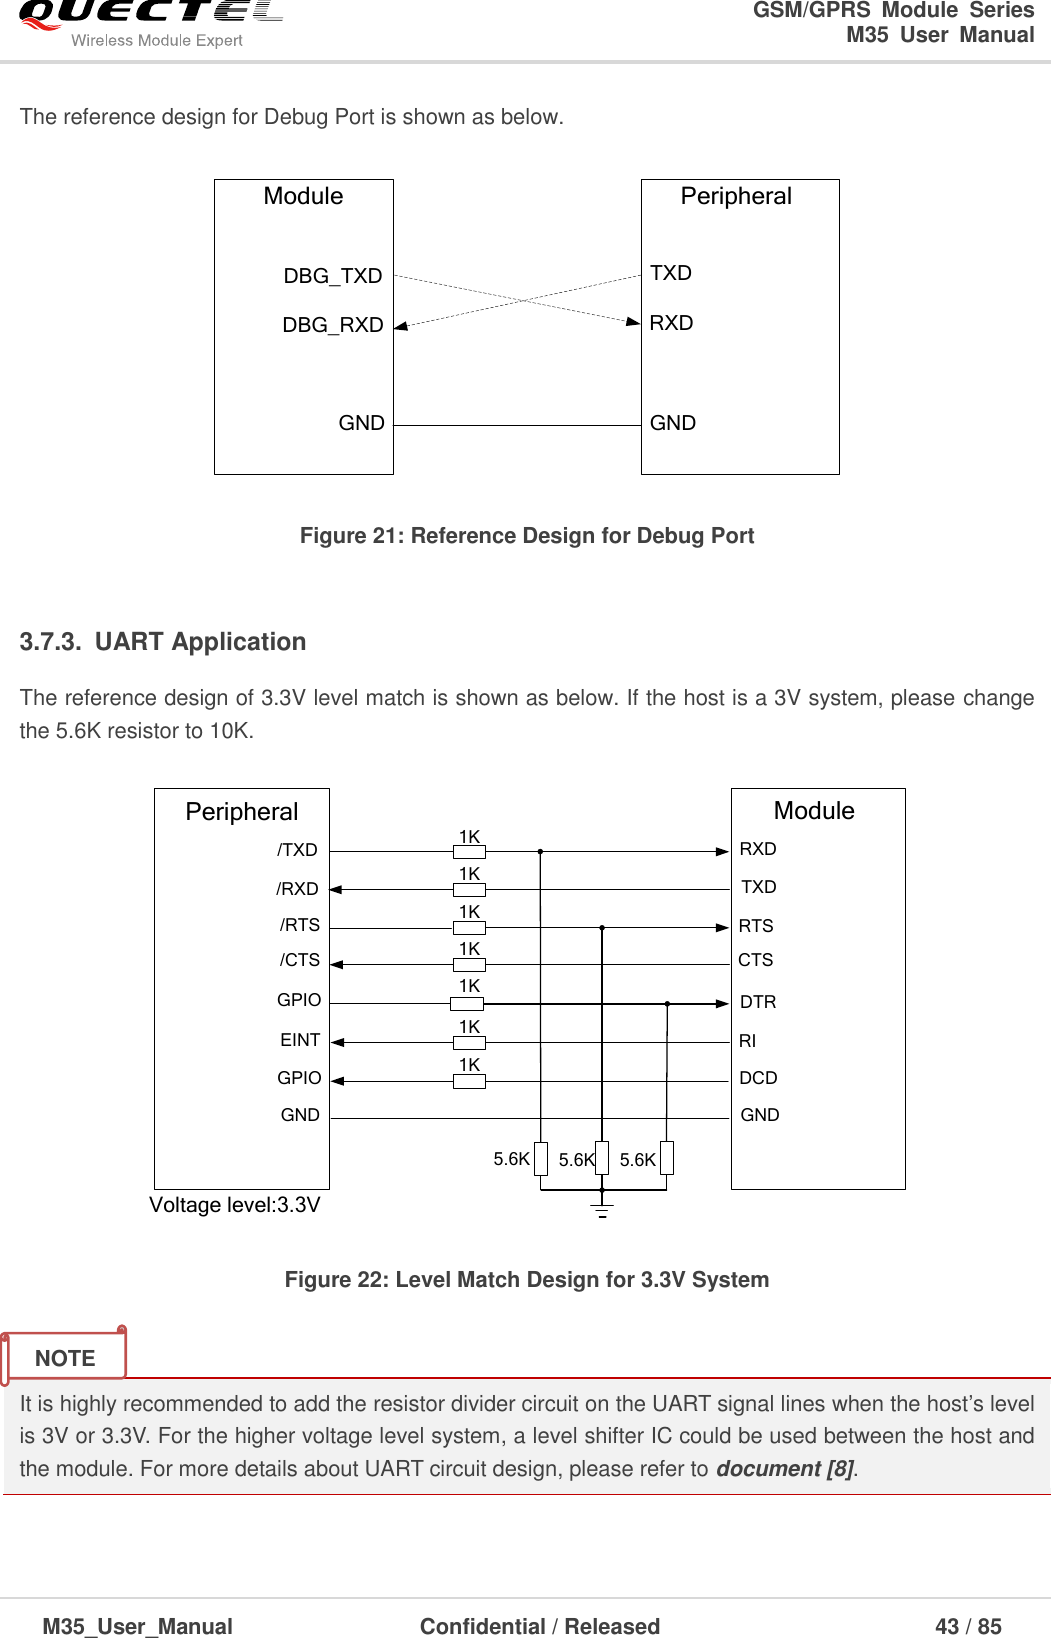                                                                              GSM/GPRS  Module  Series                                                                 M35  User  Manual  M35_User_Manual                                  Confidential / Released                             43 / 85    The reference design for Debug Port is shown as below.  PeripheralTXDRXDGND Module DBG_TXDDBG_RXD                   GND Figure 21: Reference Design for Debug Port  3.7.3.  UART Application The reference design of 3.3V level match is shown as below. If the host is a 3V system, please change the 5.6K resistor to 10K.  Peripheral/TXD/RXD1KTXDRXDRTSCTSDTRRI/RTS/CTSGPIOEINTGPIO DCDModule1K1KVoltage level:3.3V5.6K5.6K5.6K1K1K1K1KGND GND Figure 22: Level Match Design for 3.3V System  It is highly recommended to add the resistor divider circuit on the UART signal lines when the host’s level is 3V or 3.3V. For the higher voltage level system, a level shifter IC could be used between the host and the module. For more details about UART circuit design, please refer to document [8].  NOTE 